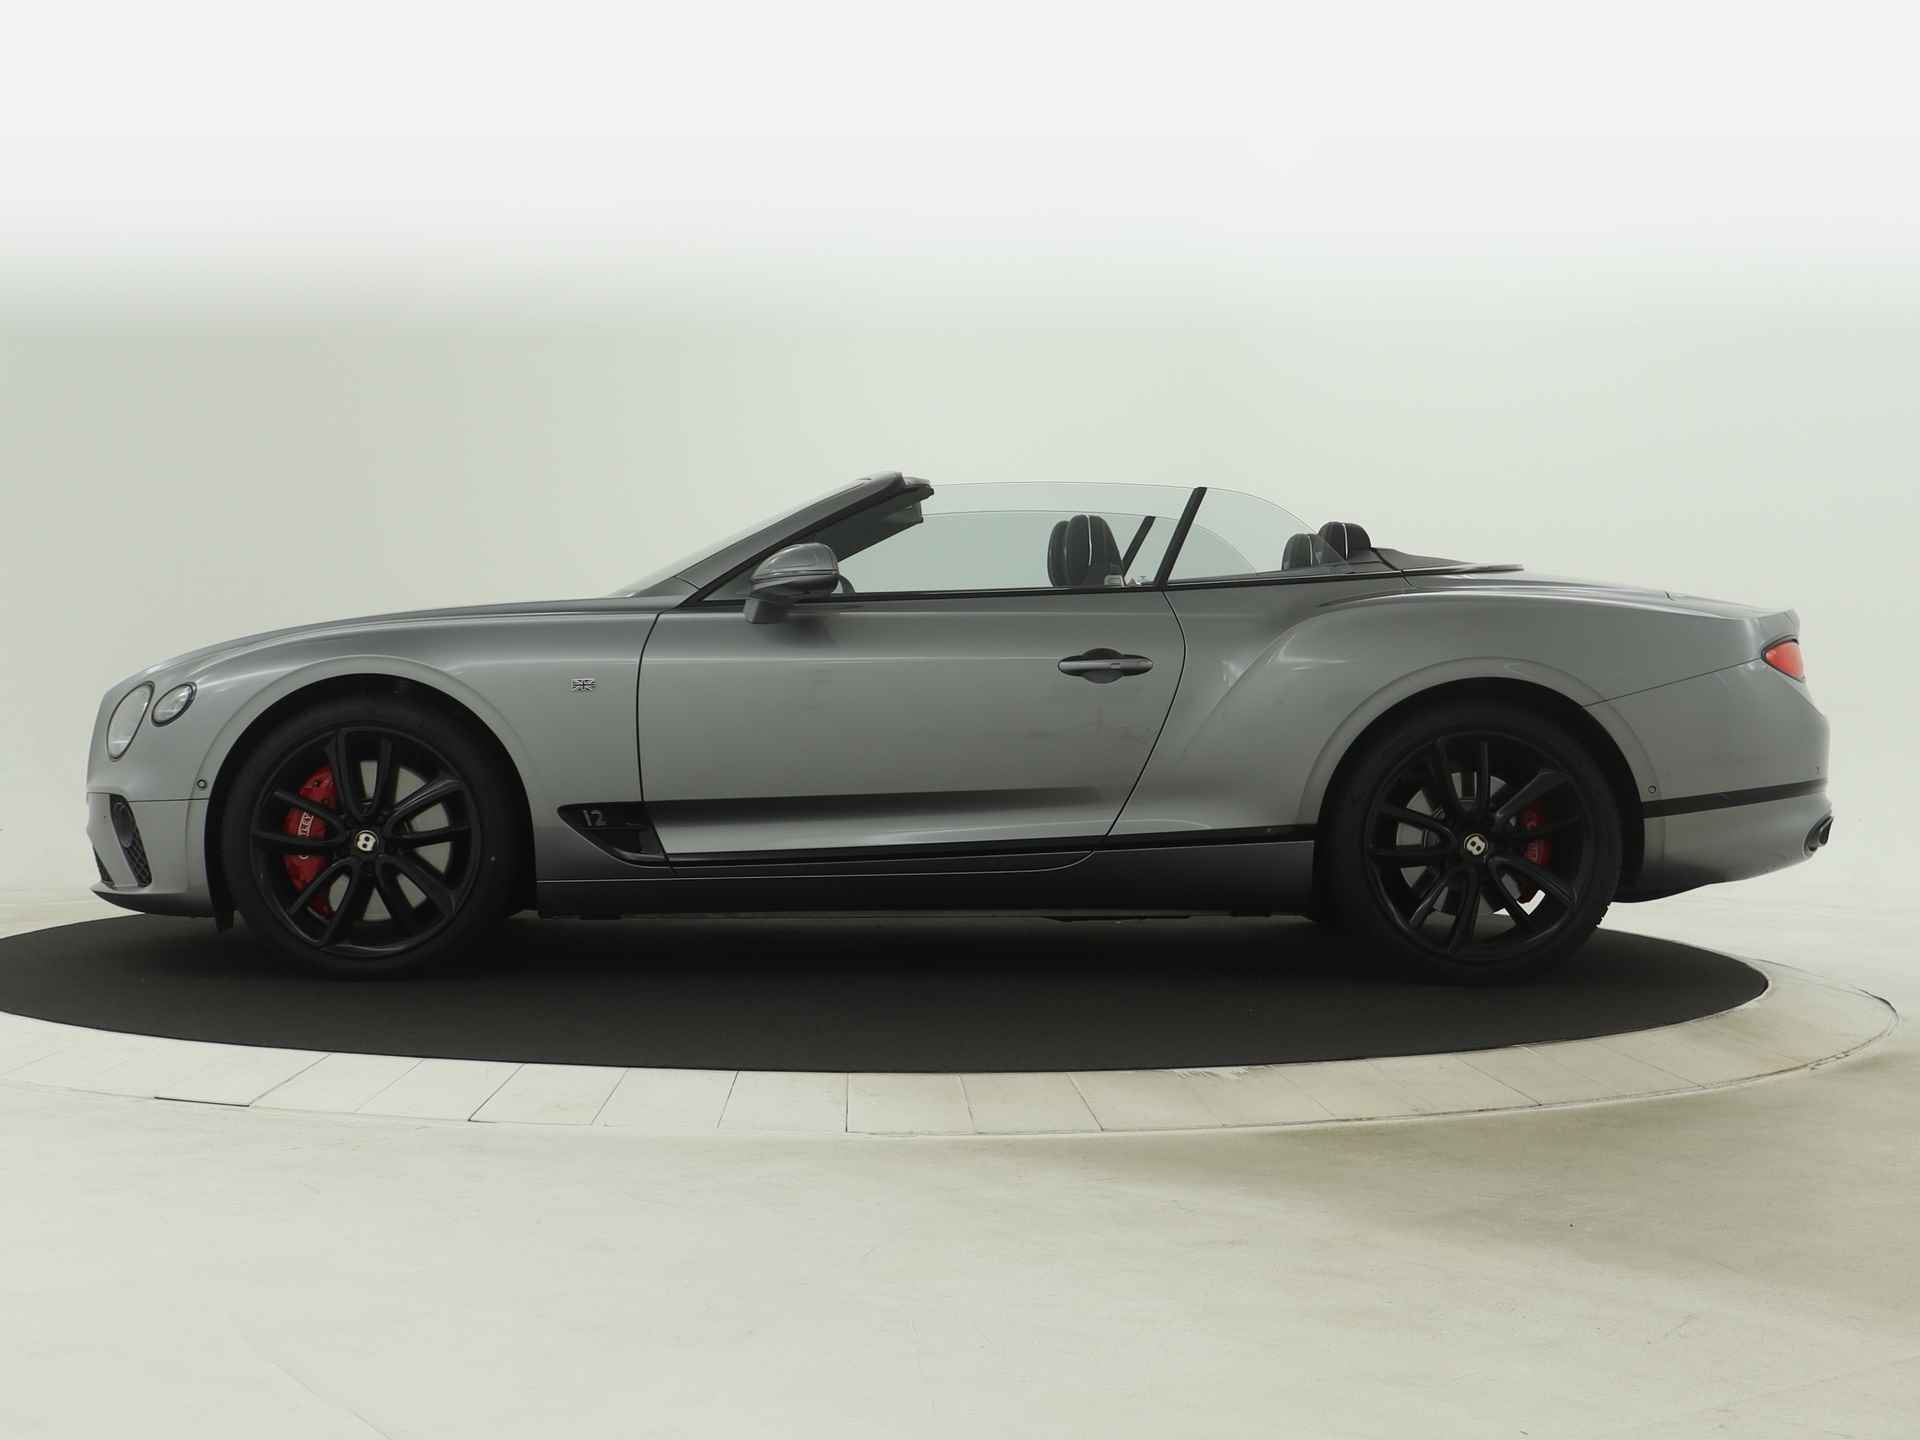 Bentley Continental GTC 6.0 W12 First Edition Mulliner - Bang & Olufsen - Black package - Massage seats - 4/46